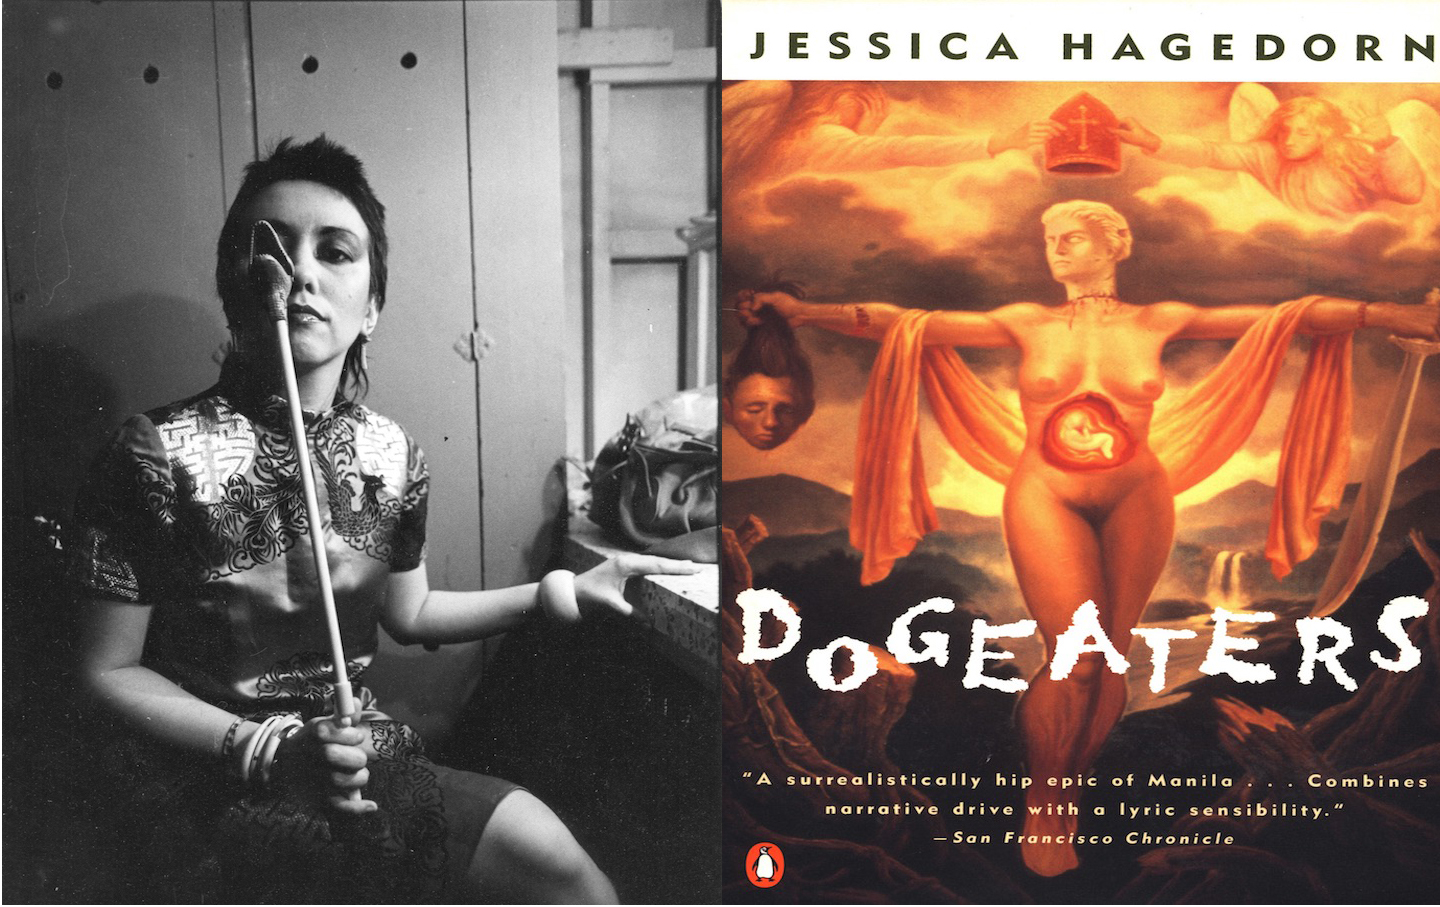 Jessica Hagedorn Looks Back on the Legacy of ‘Dogeaters’